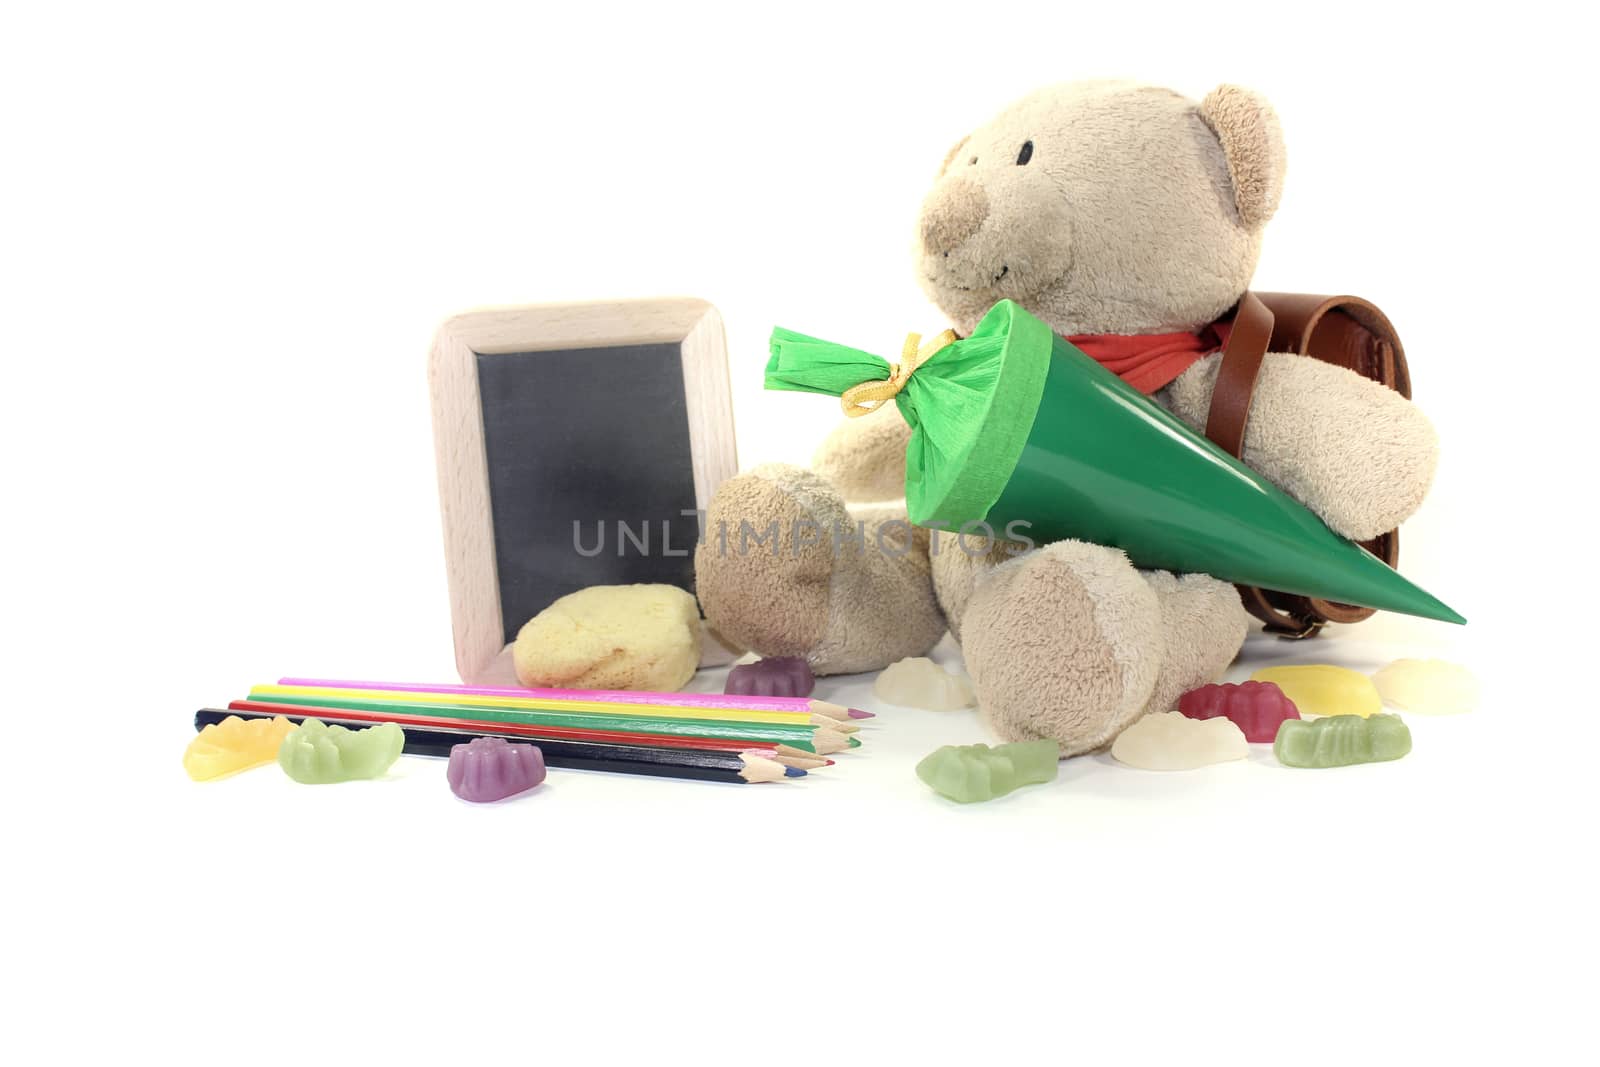 Teddy bear with school bag, wallet, candy, pens and board on a light background